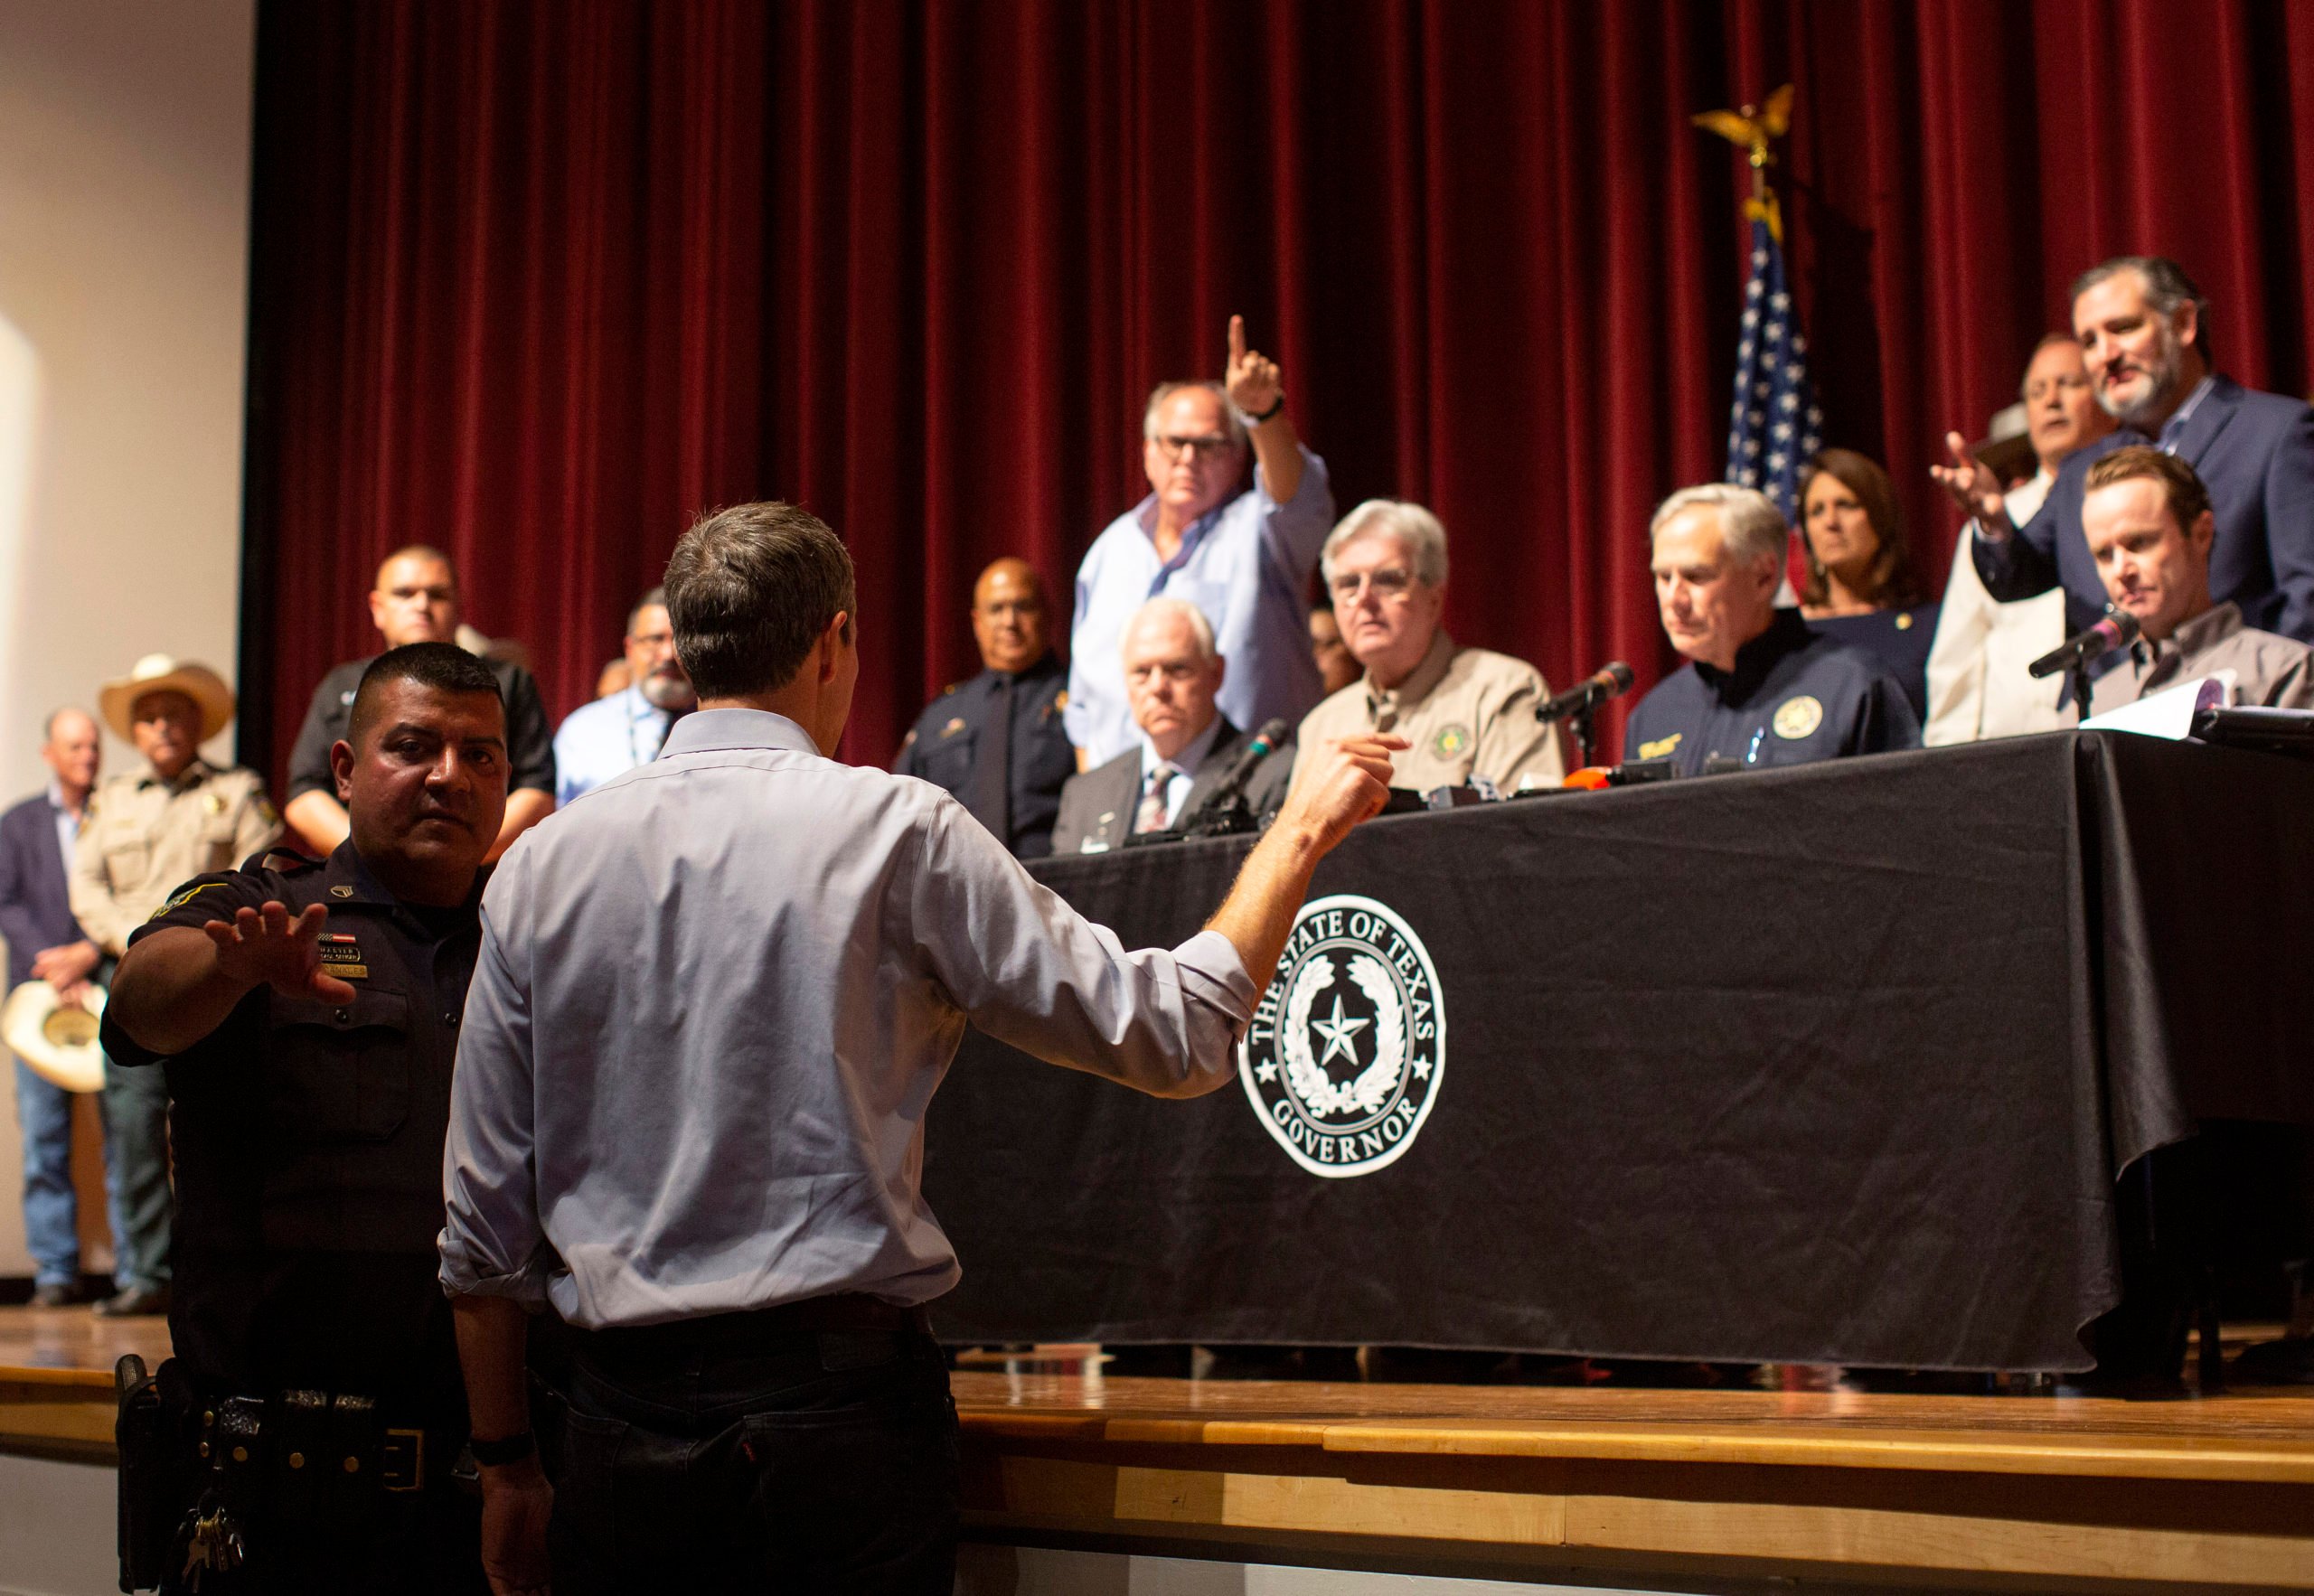 A police officer attempts to restrain Beto O'Rourke as he confronts Greg Abbott, who is seated on a dais.